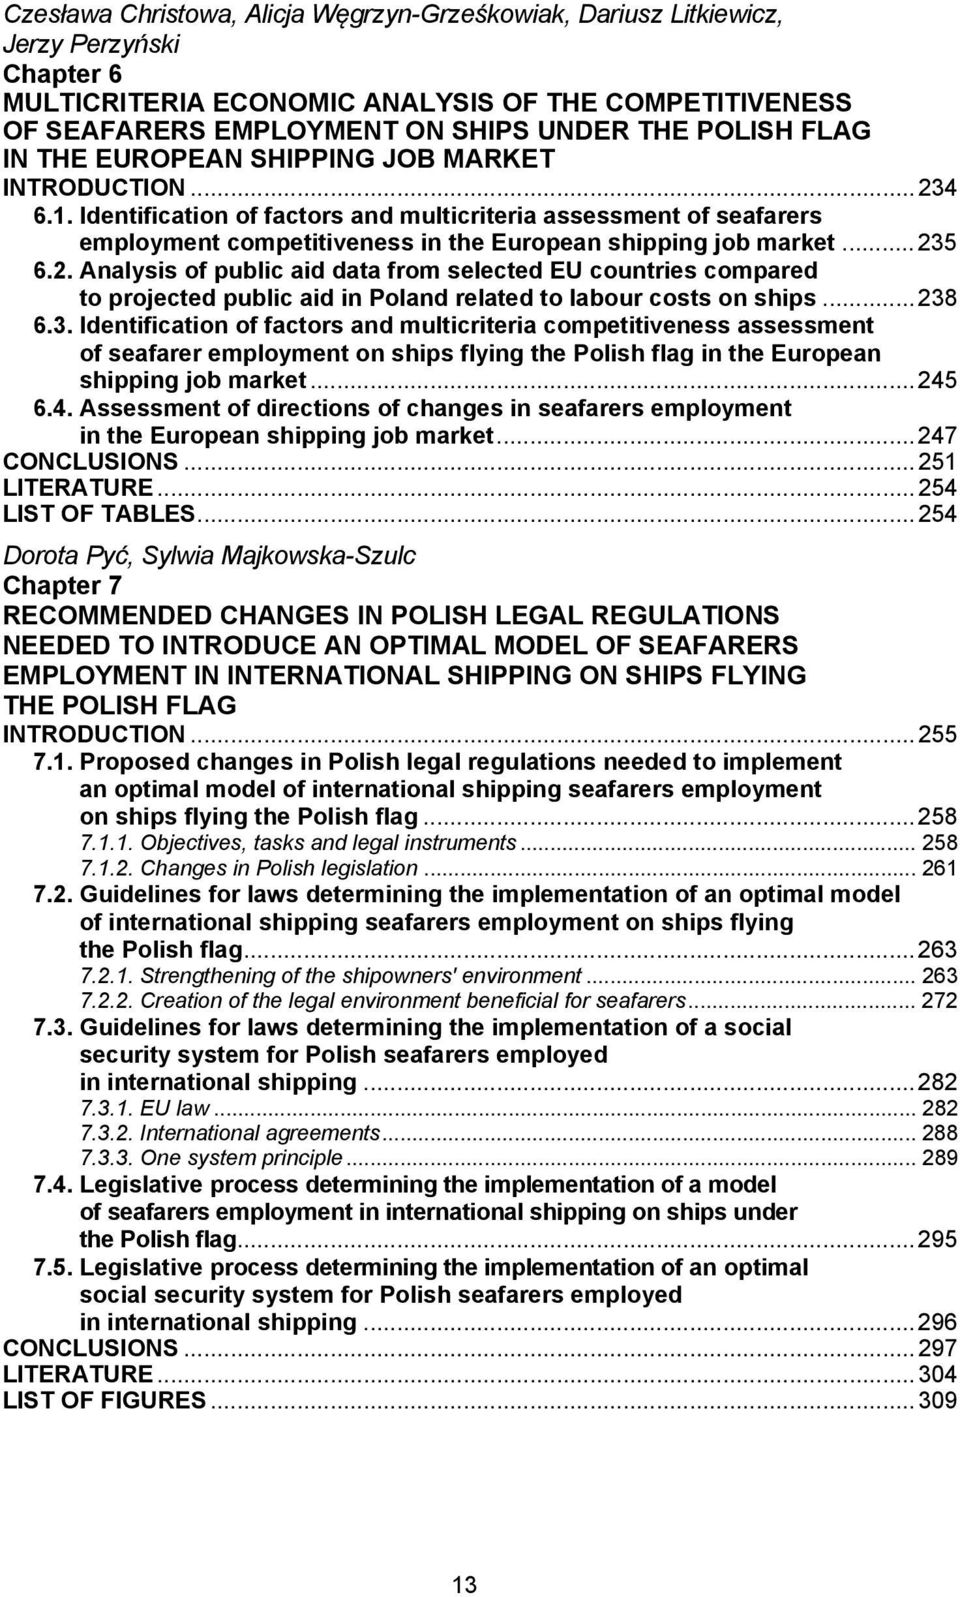 .. 235 6.2. Analysis of public aid data from selected EU countries compared to projected public aid in Poland related to labour costs on ships... 238 6.3. Identification of factors and multicriteria competitiveness assessment of seafarer employment on ships flying the Polish flag in the European shipping job market.